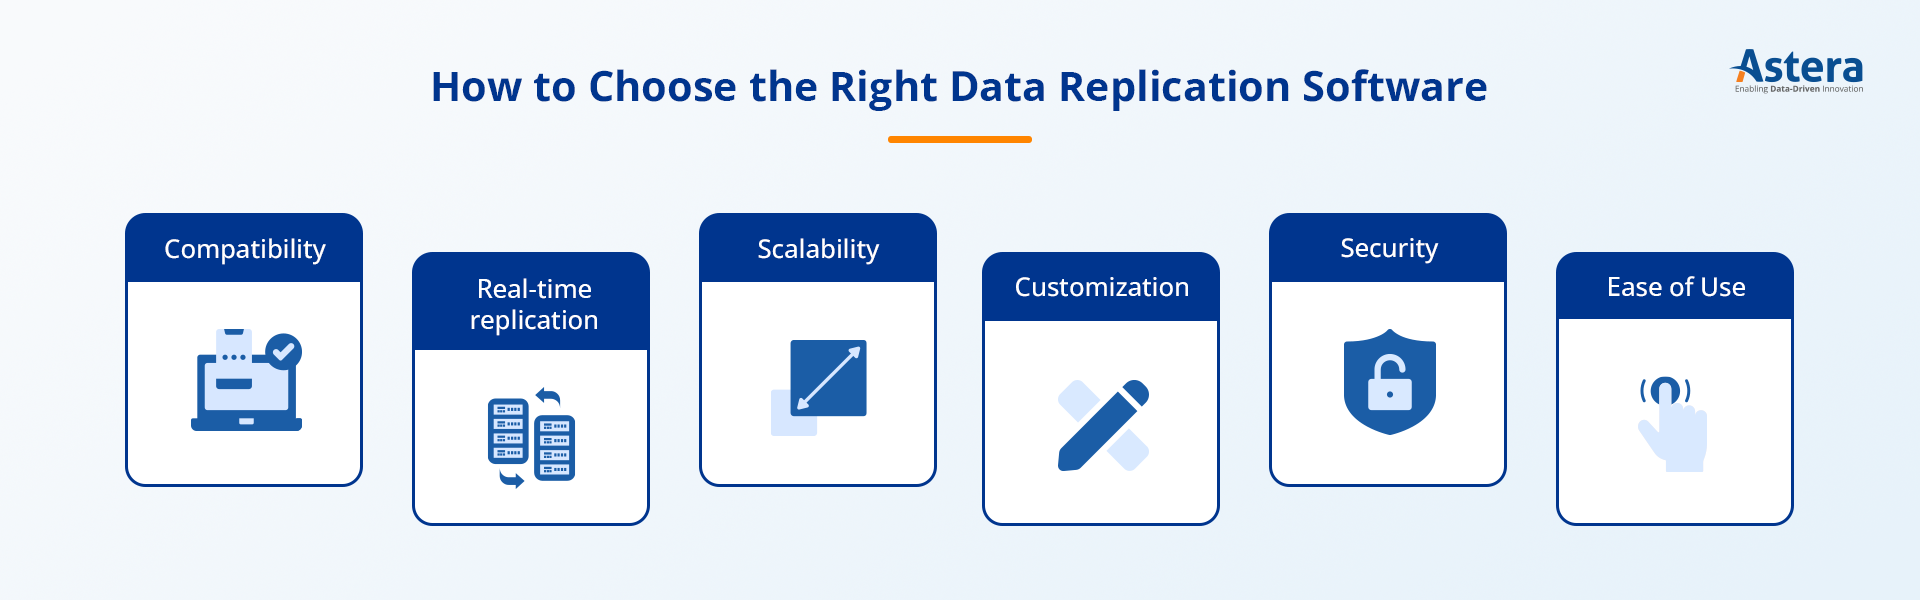 Factors to consider when choosing the right data replication software